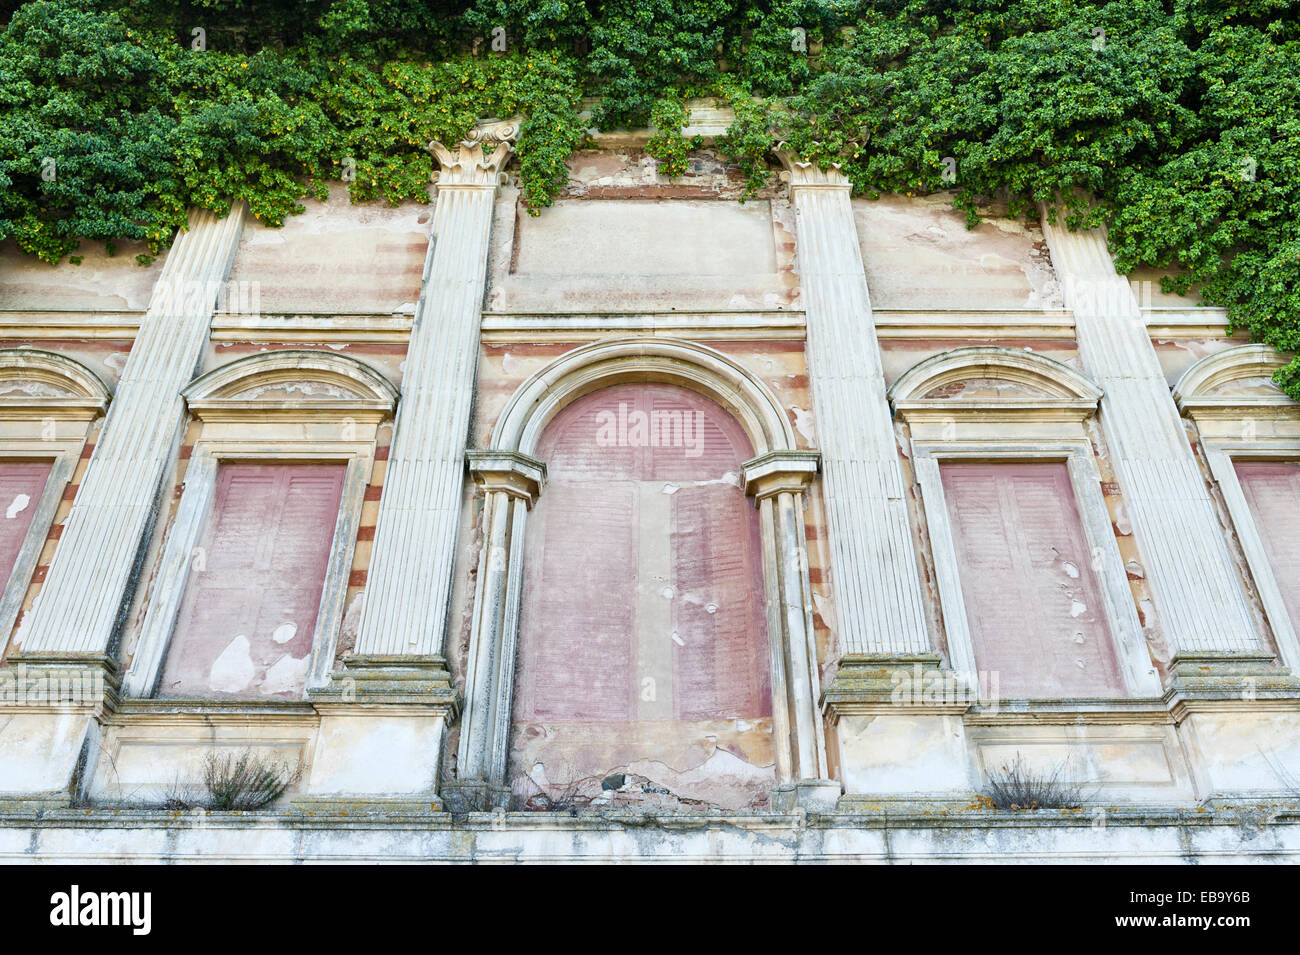 Villa Trissino Marzotto, Vicenza, Italy. Trompe l'oeil painted shutters on the facade of the ruined lower villa, destroyed by fire in 1841 Stock Photo